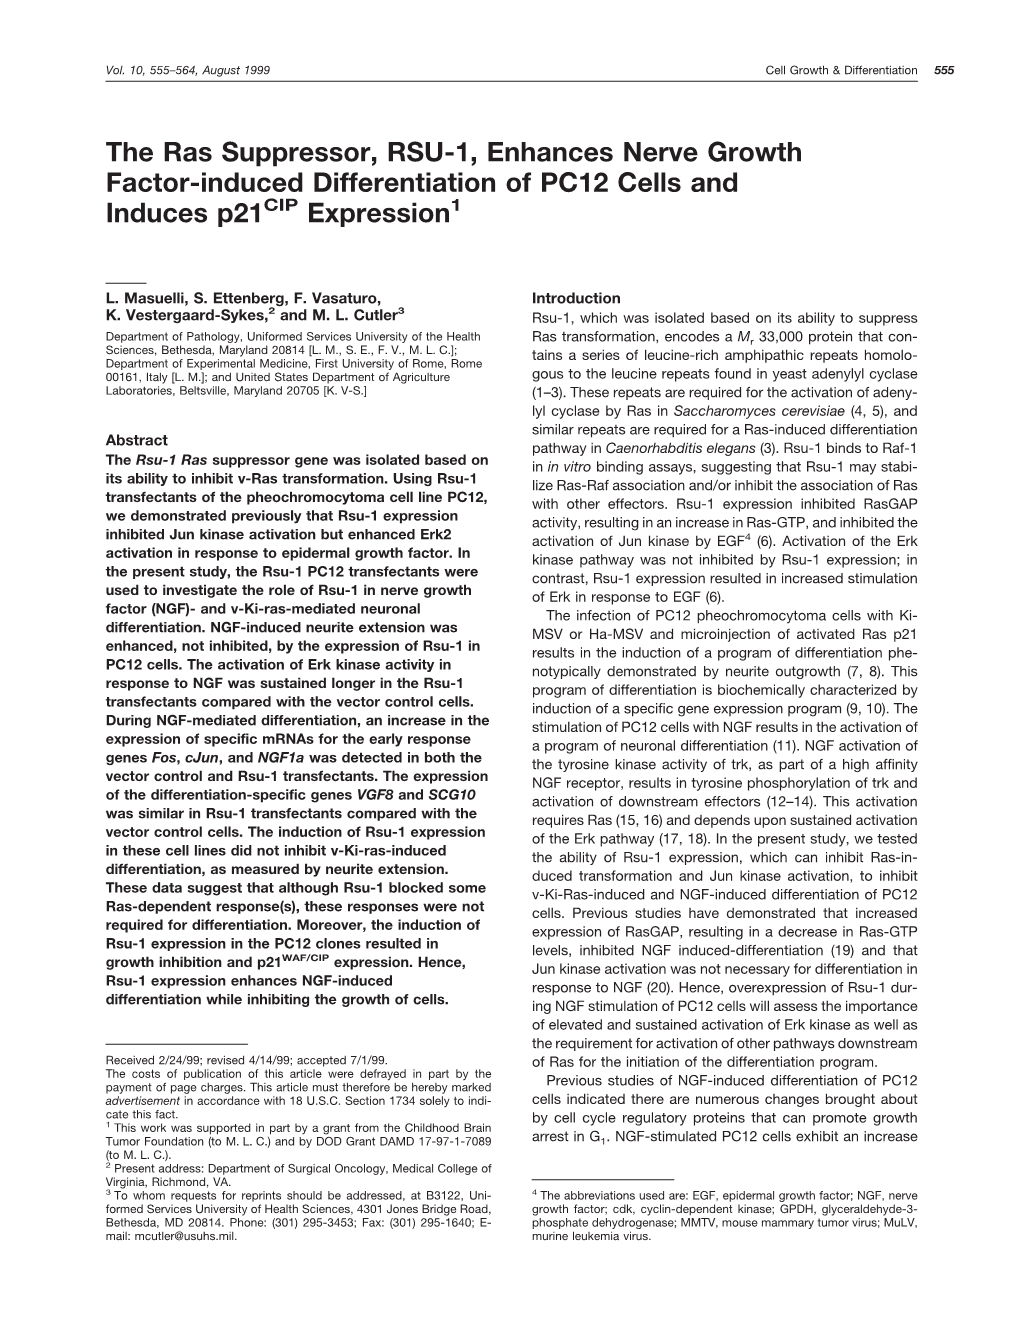 The Ras Suppressor, RSU-1, Enhances Nerve Growth Factor-Induced Differentiation of PC12 Cells and Induces P21cip Expression1